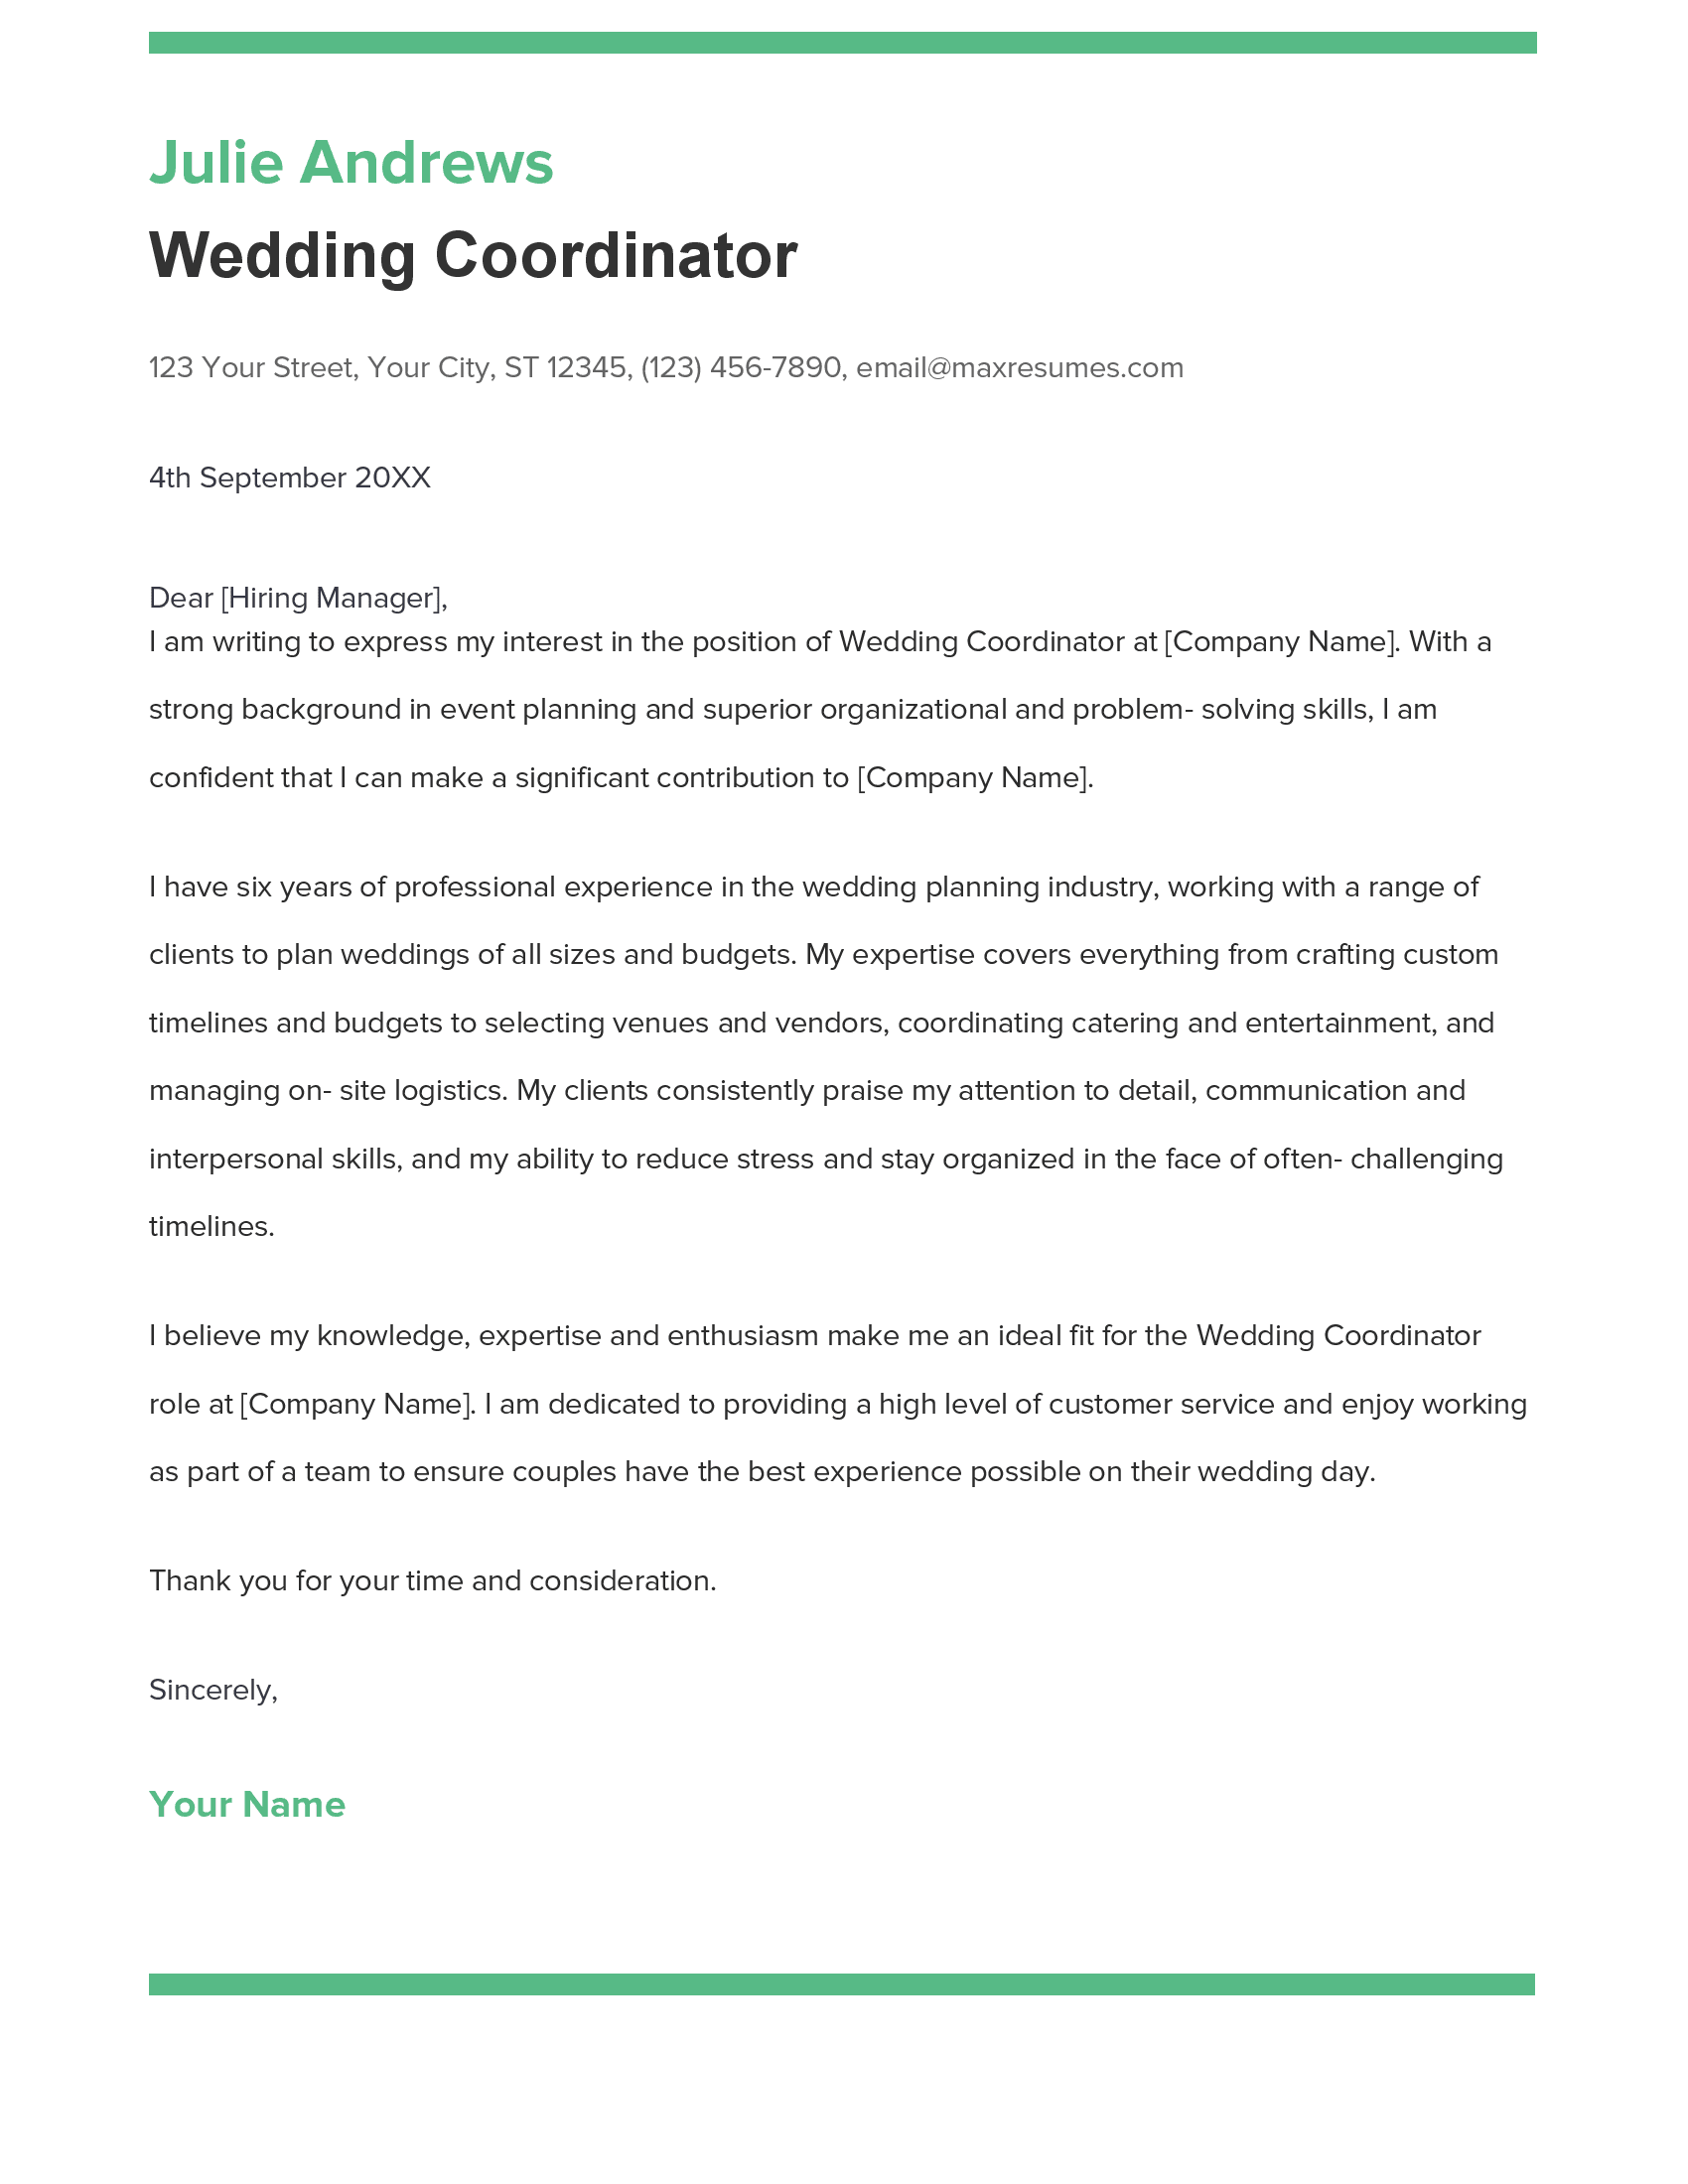 Wedding Coordinator Cover Letter Example